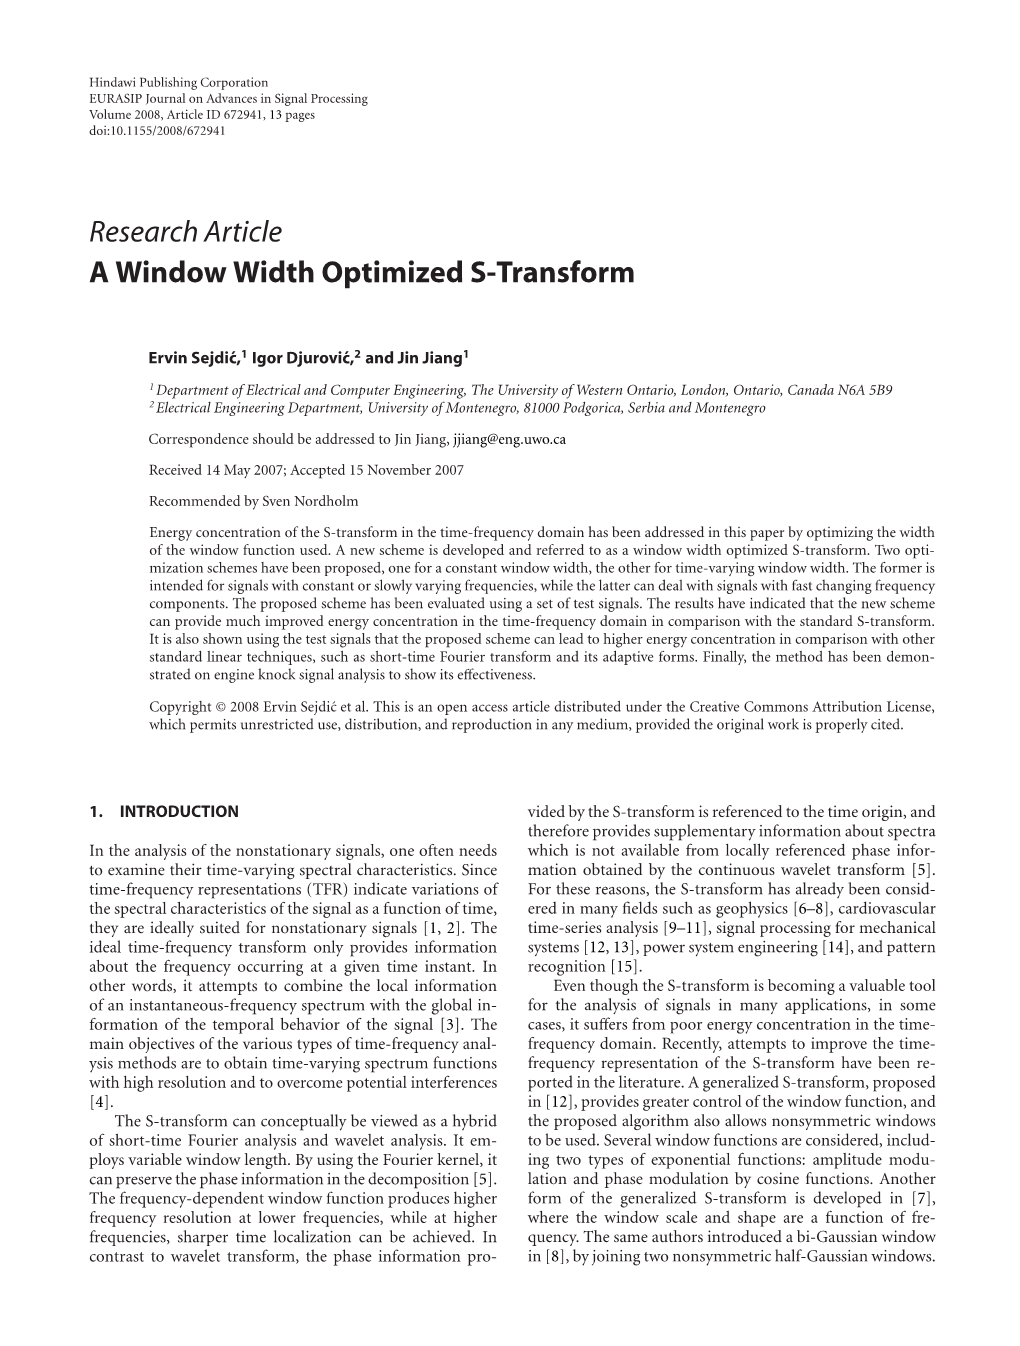 Research Article a Window Width Optimized S-Transform